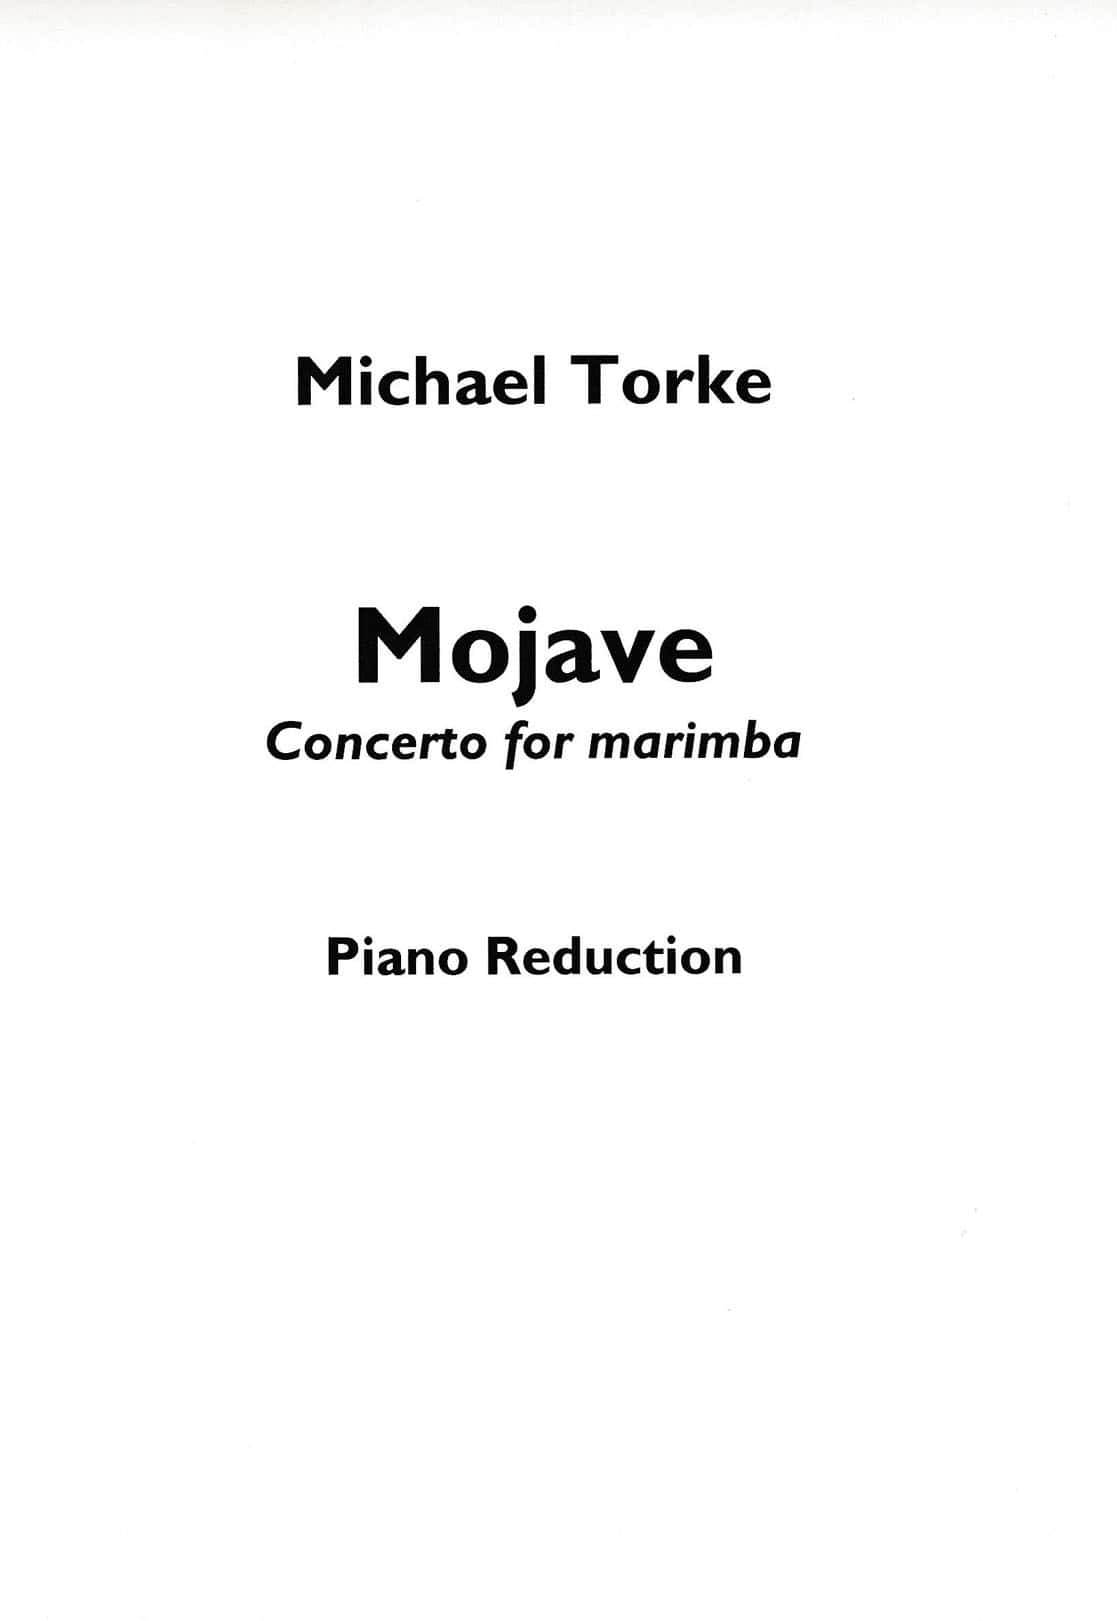 Mojave - Concerto for Marimba (pno reduction) by Michael Torke